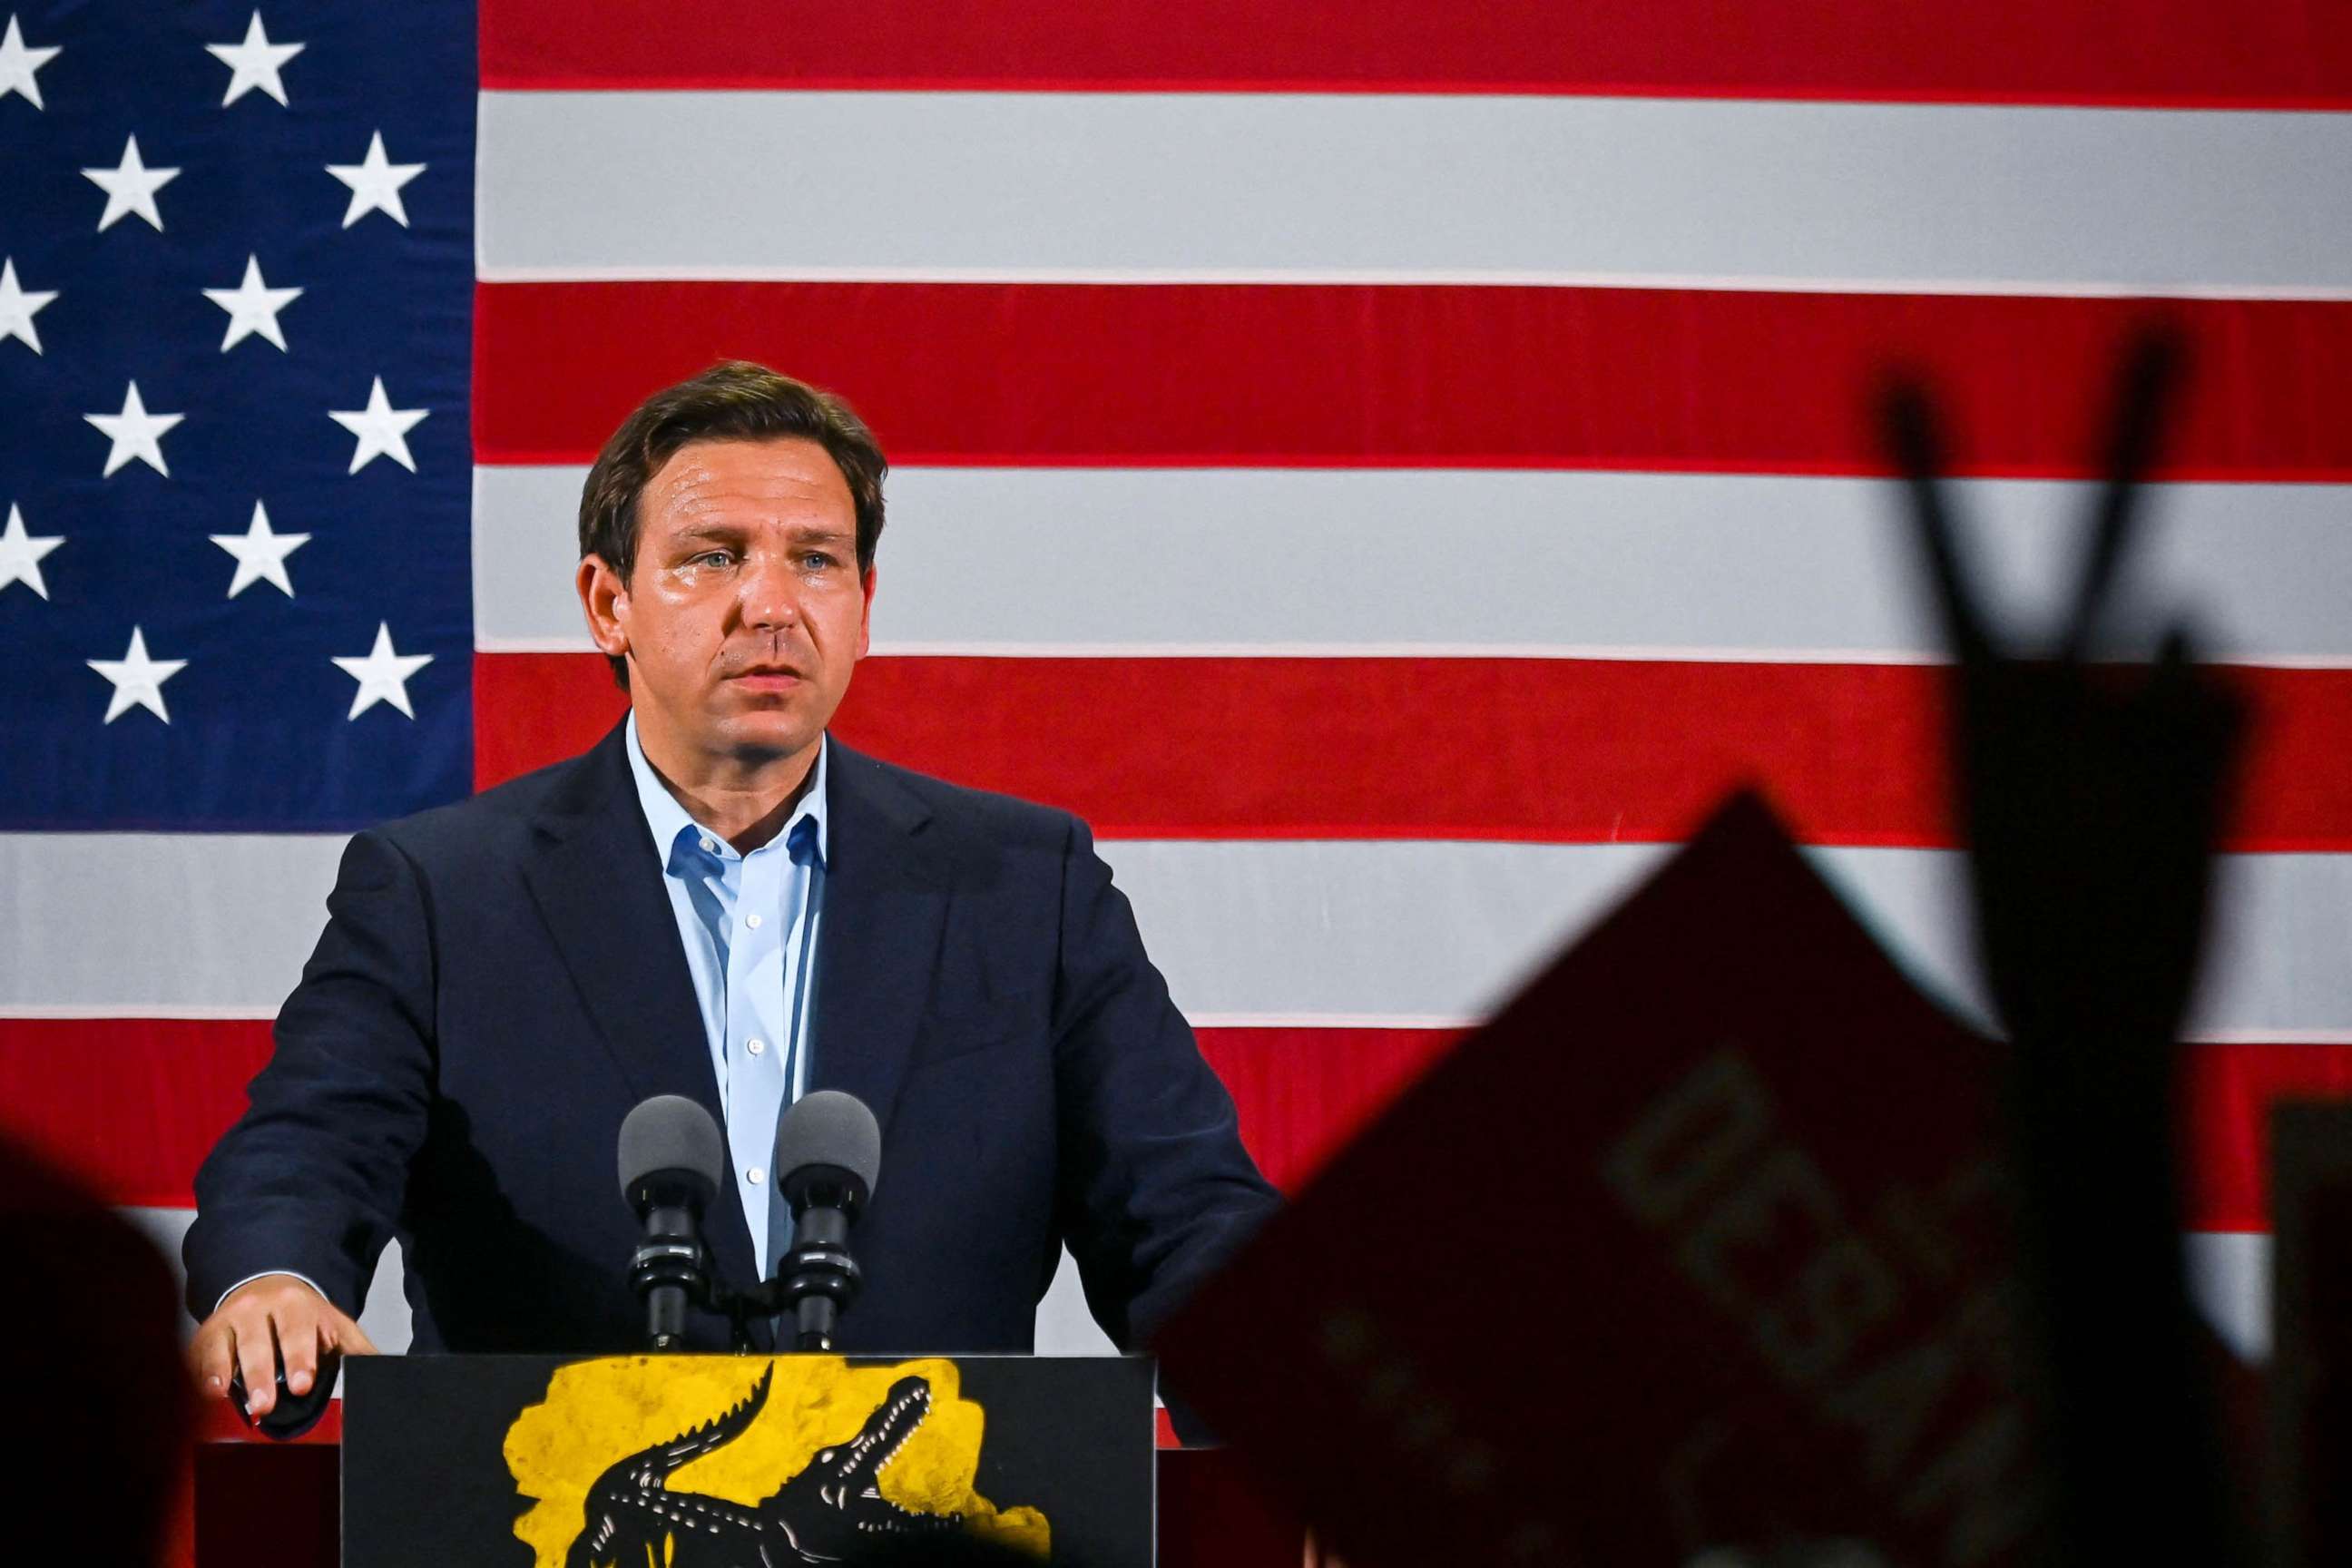 Florida Governor Ron DeSantis speaks during a "Unite and Win" event as he campaigns for re-electionon the eve of the US midterm elections, at Hialeah Park Clubhouse, in Hialeah, Fla, on Nov 7, 2022.